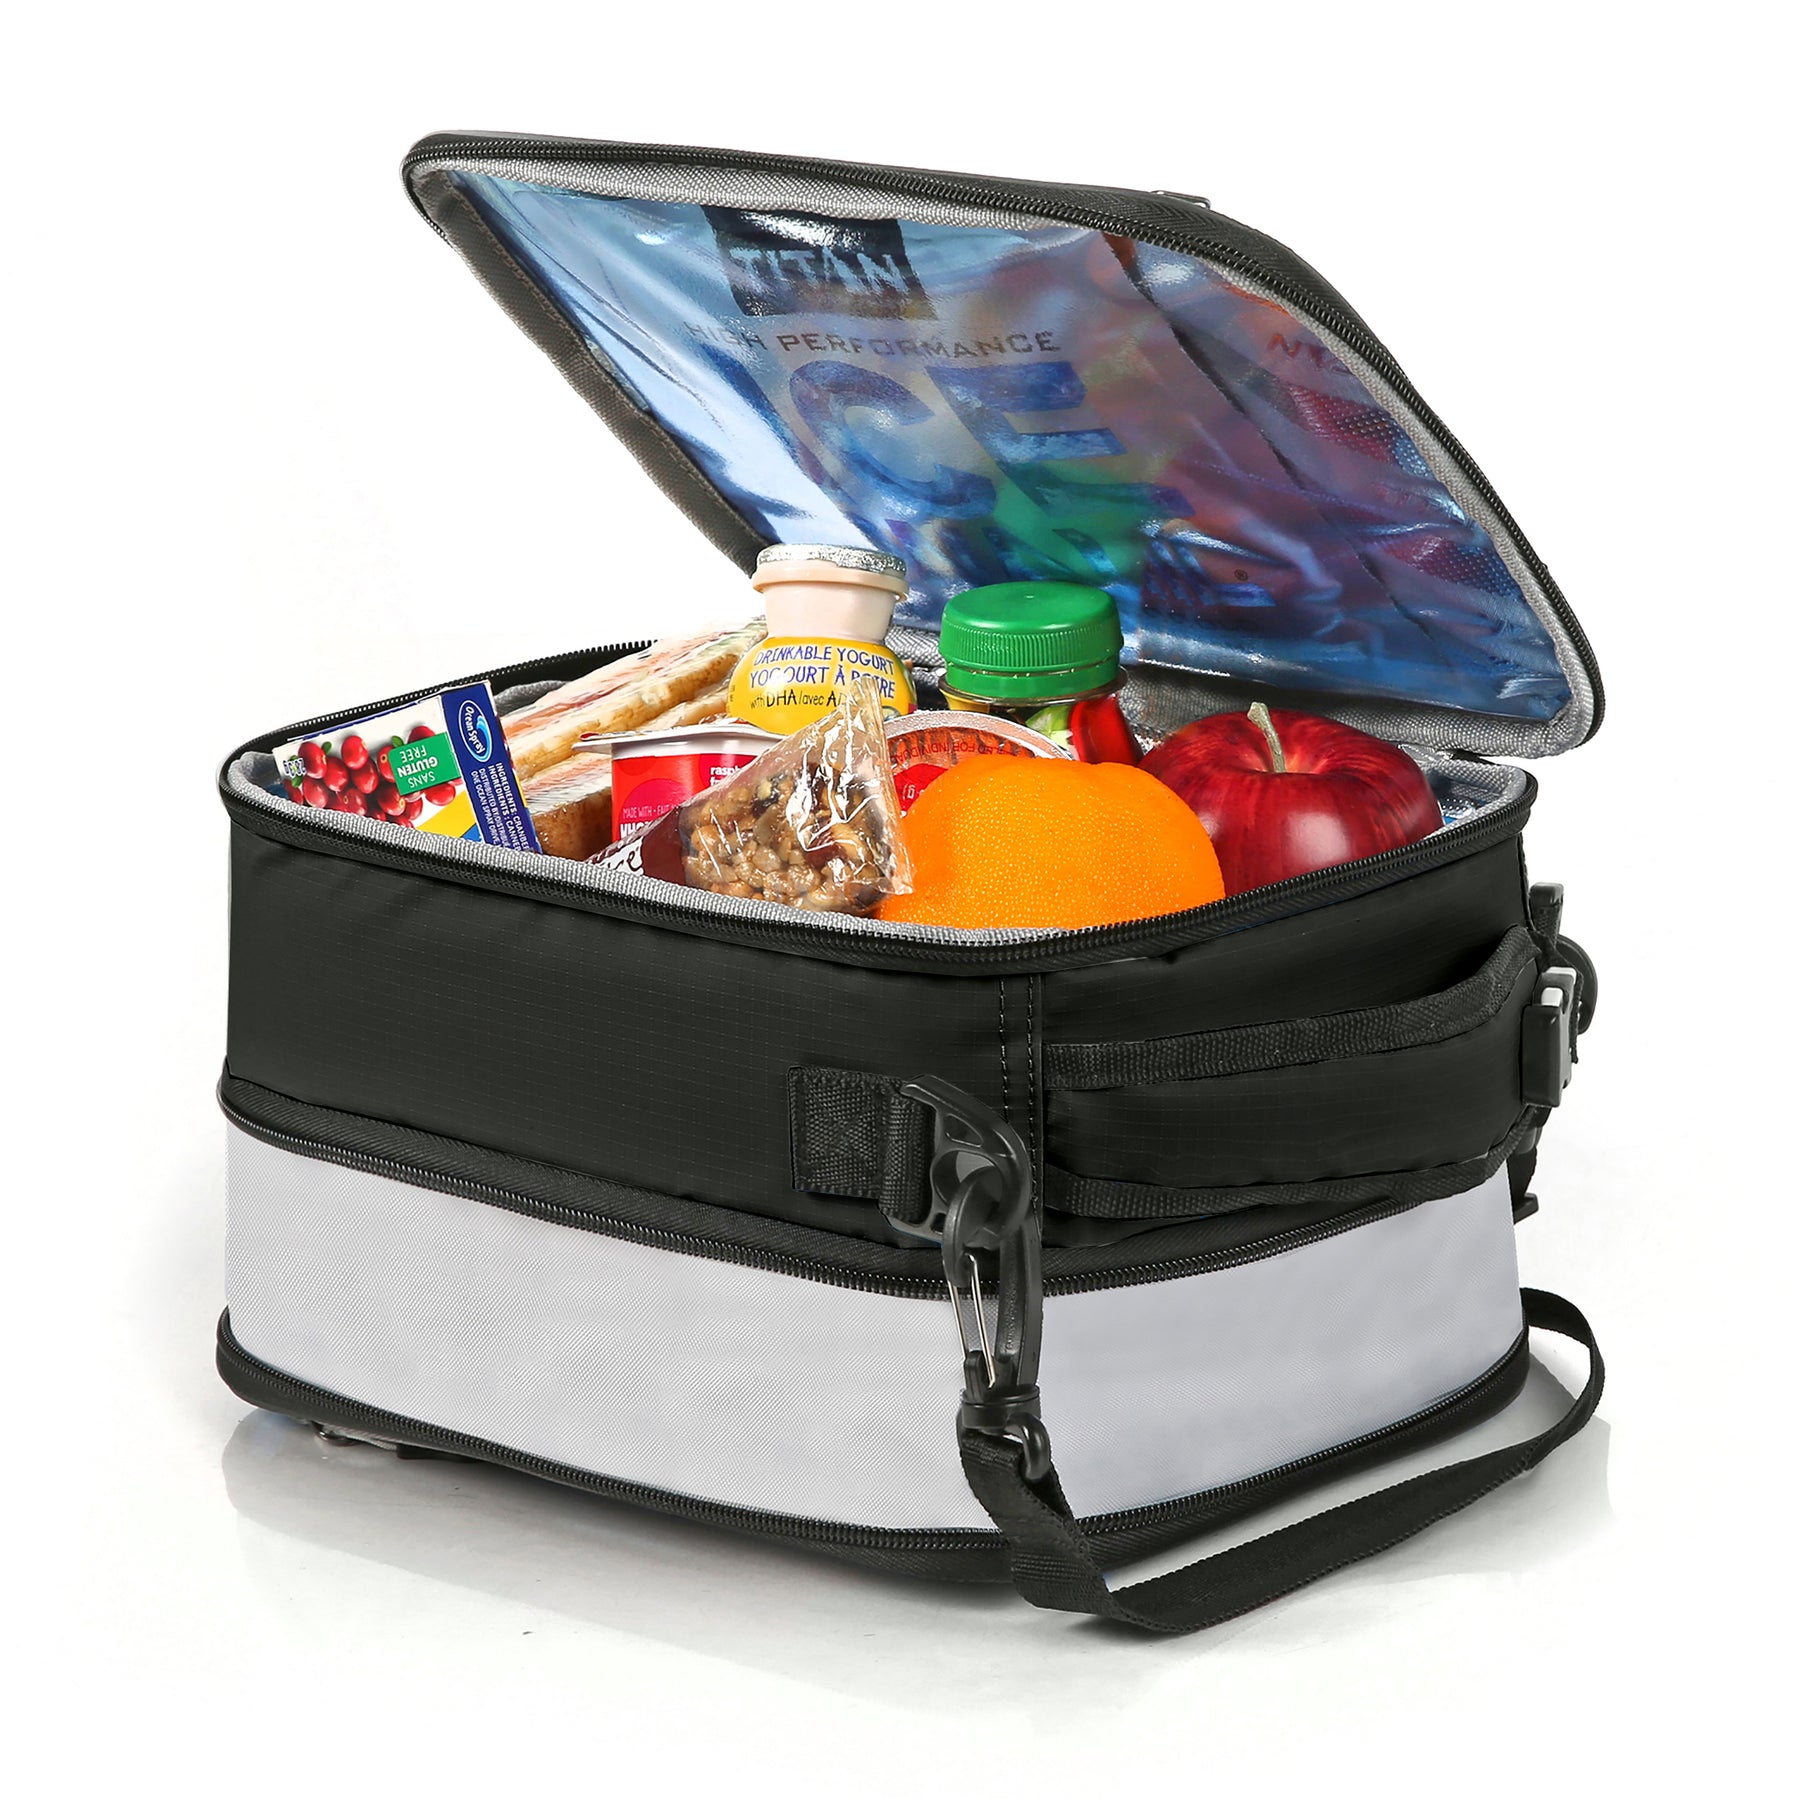 Zone Tech Portable Insulated Lunch Box